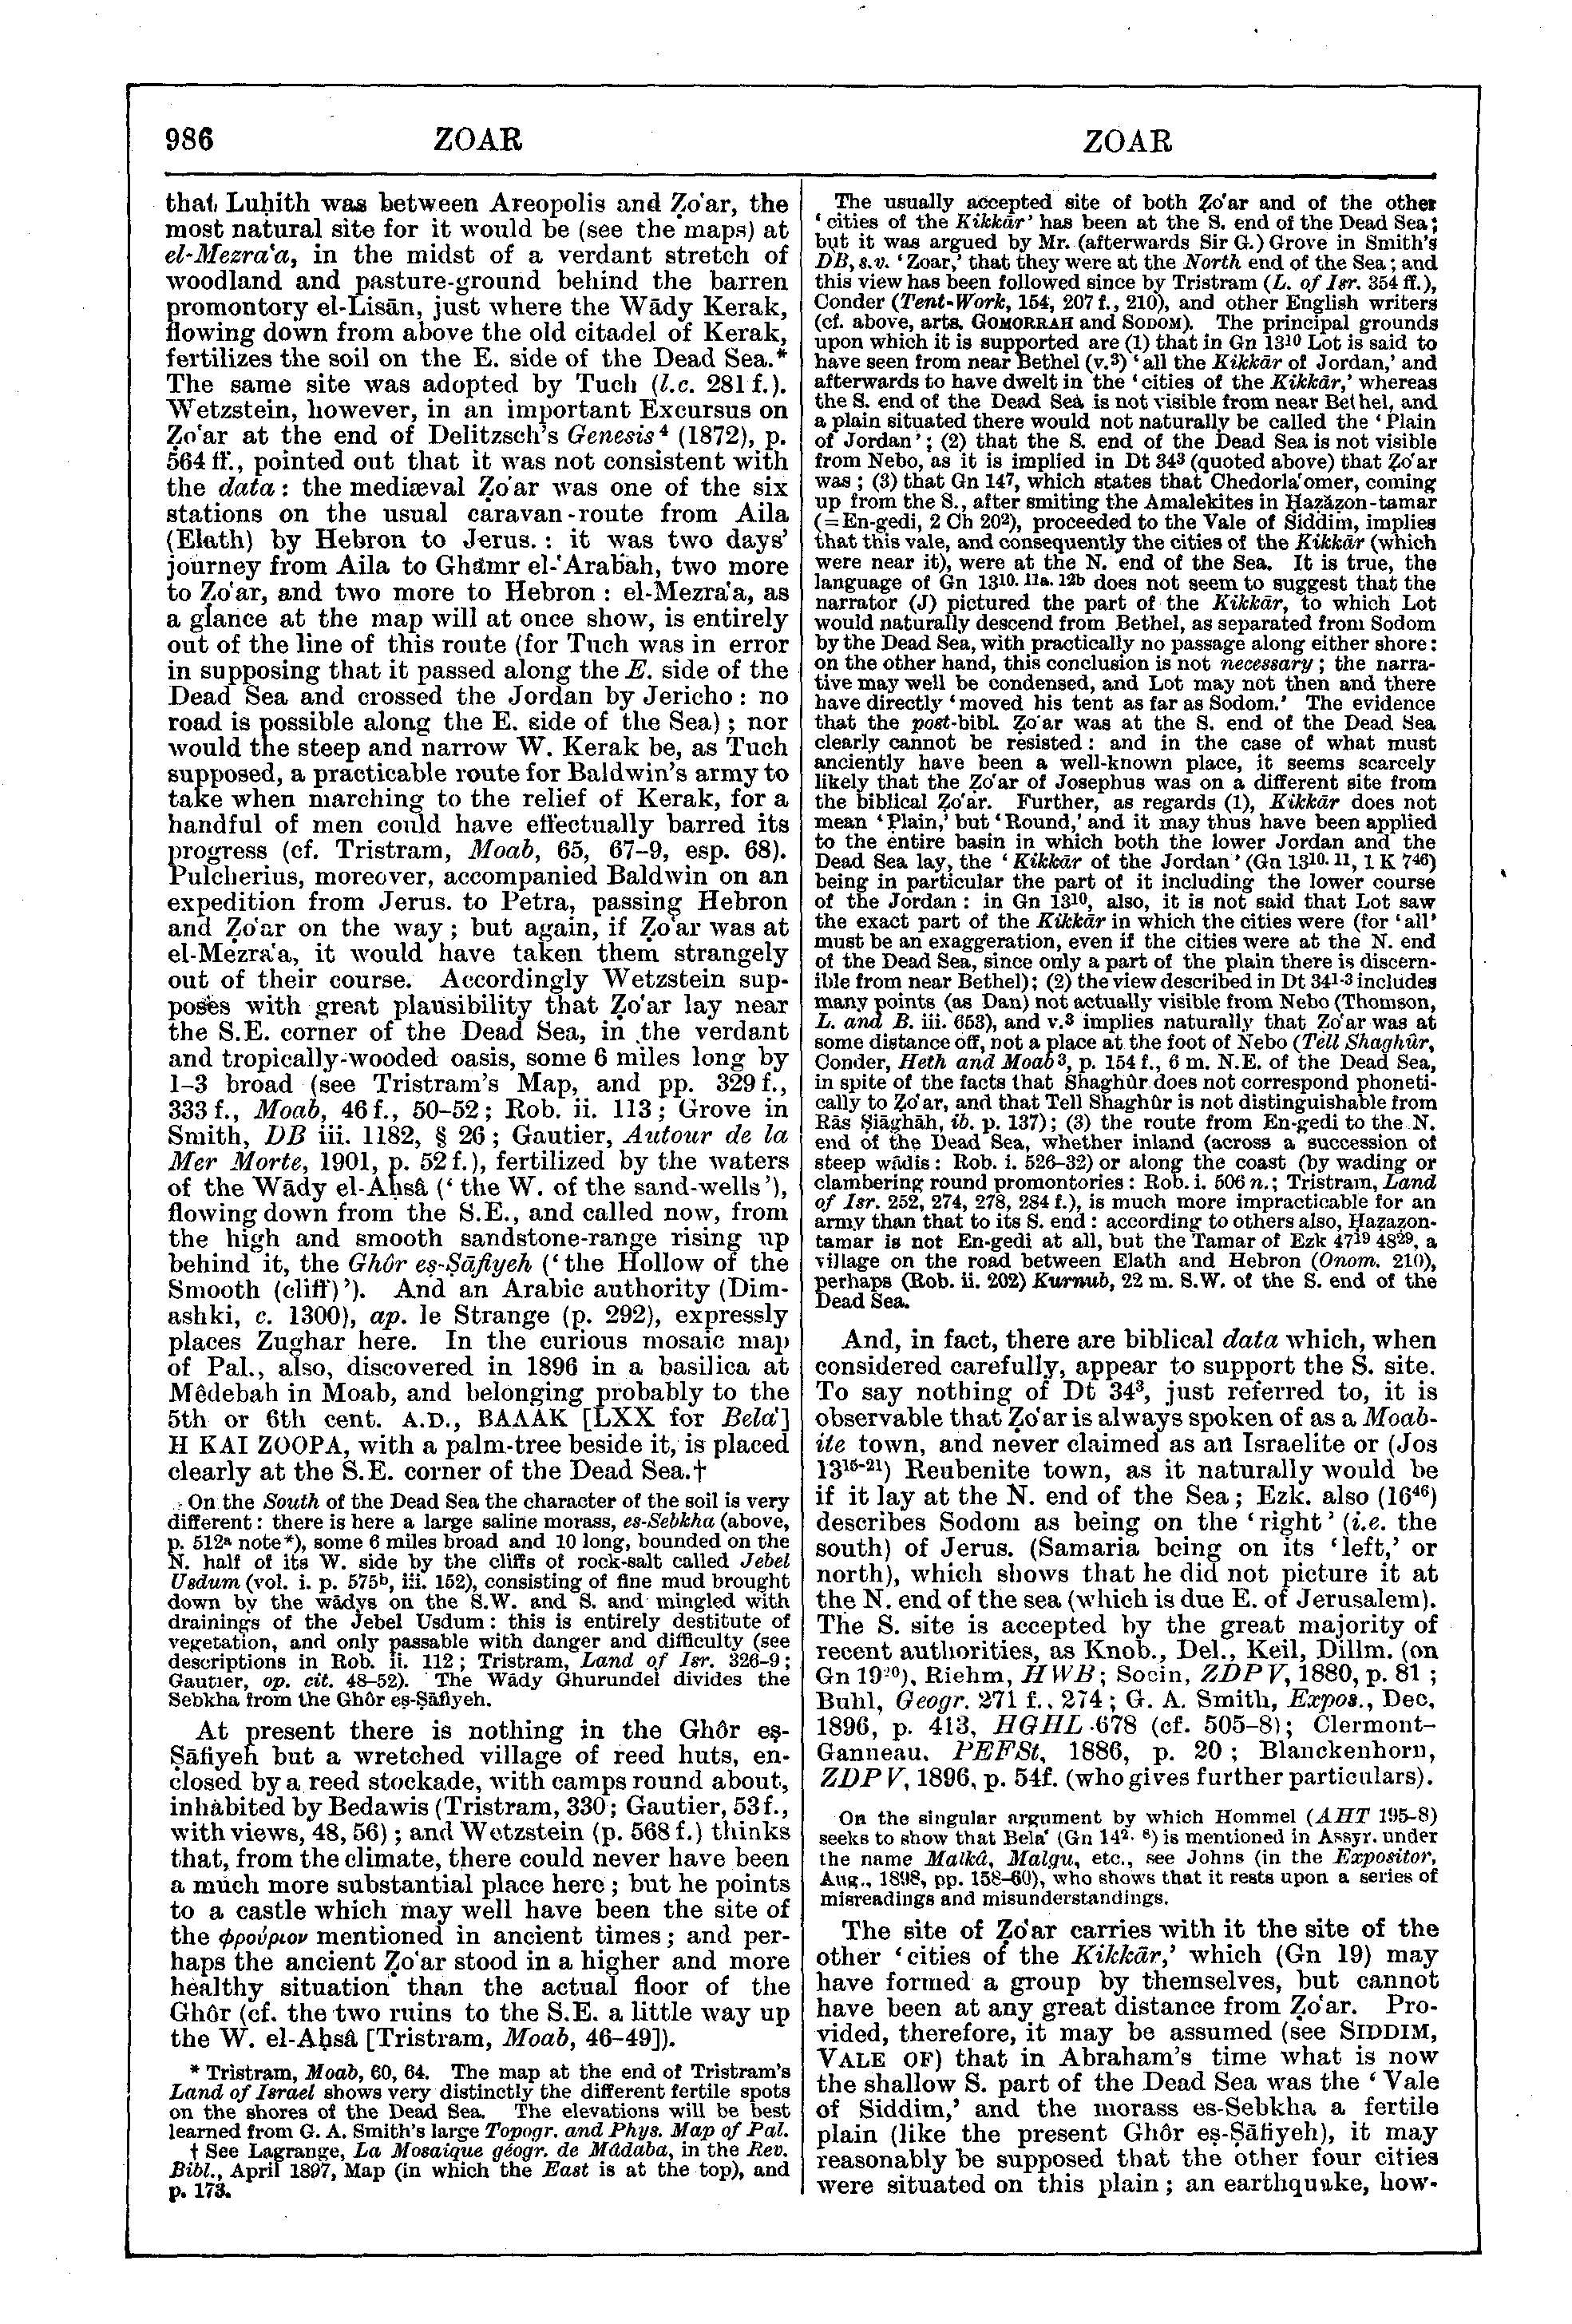 Image of page 986